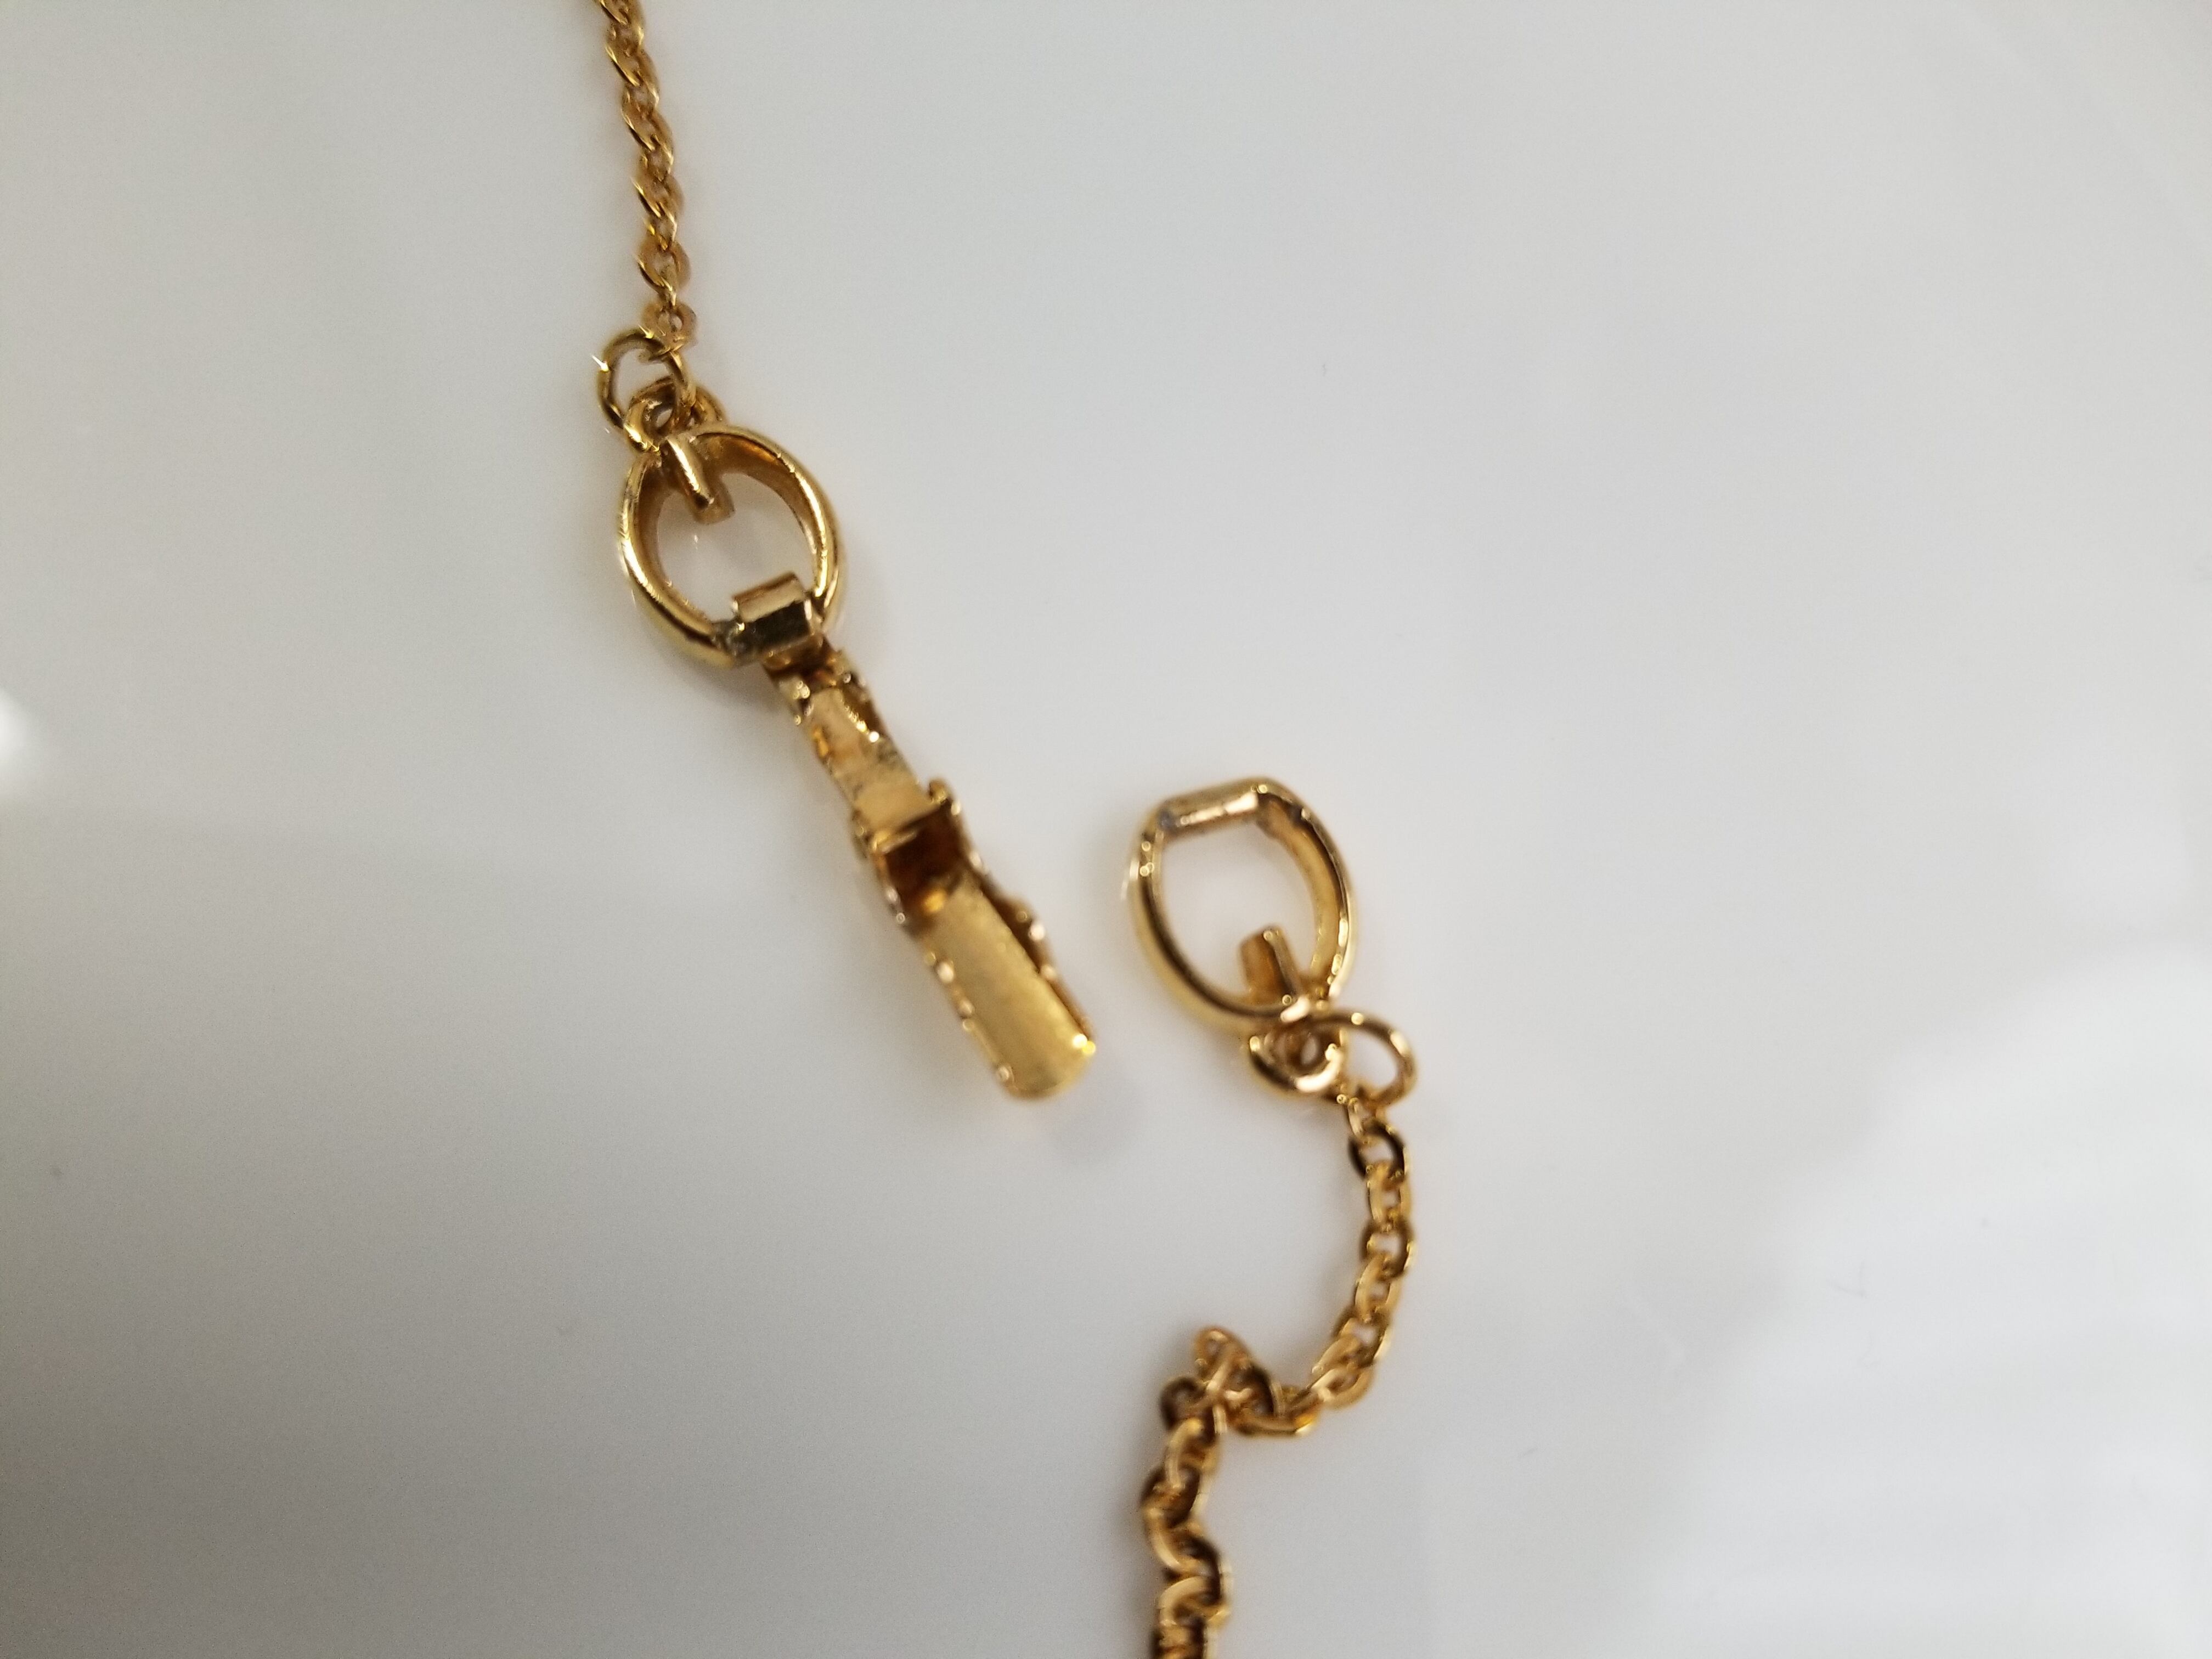 GIVENCHY Vintage necklace ジバンシー ヴィンテージ ネックレス 